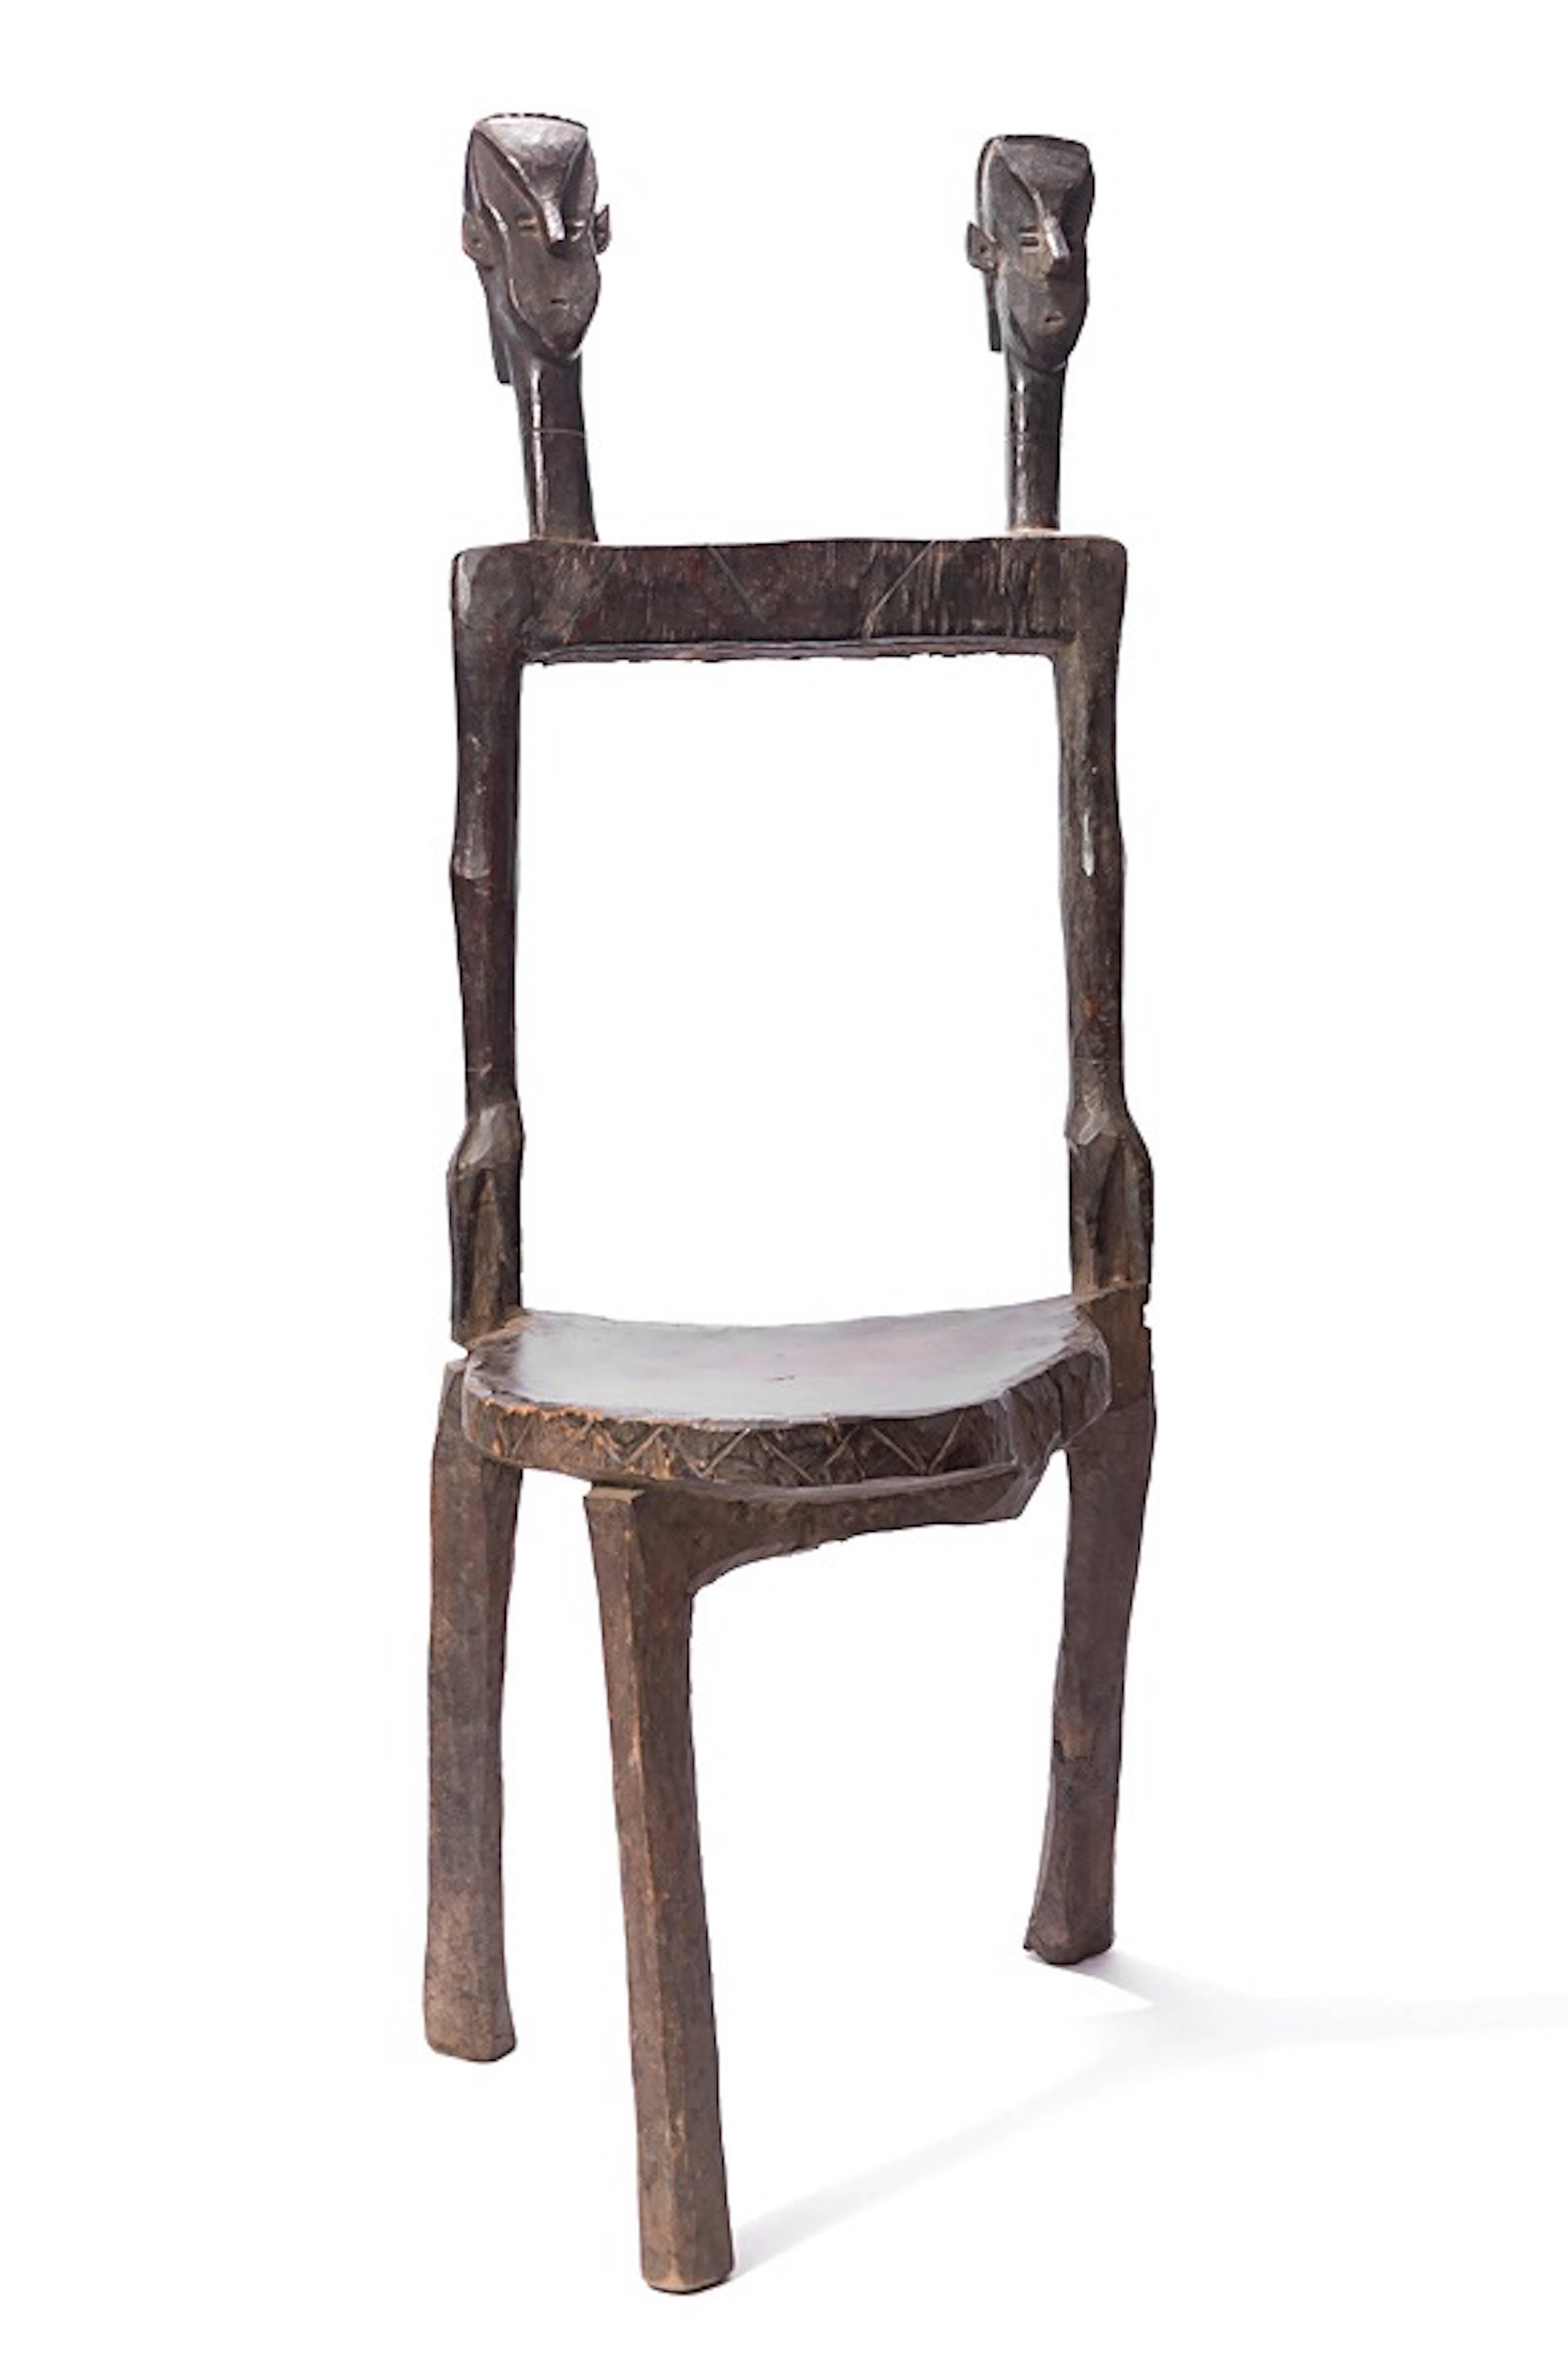 Gogo Chief’s chair. A fabulous Classic Cheif's chair from the Gogo peoples of Tanzania. A patralineal, pastoral society, only the chief would use this chair. During village meetings, counseling, and matters of importance, he would sit in this chair.